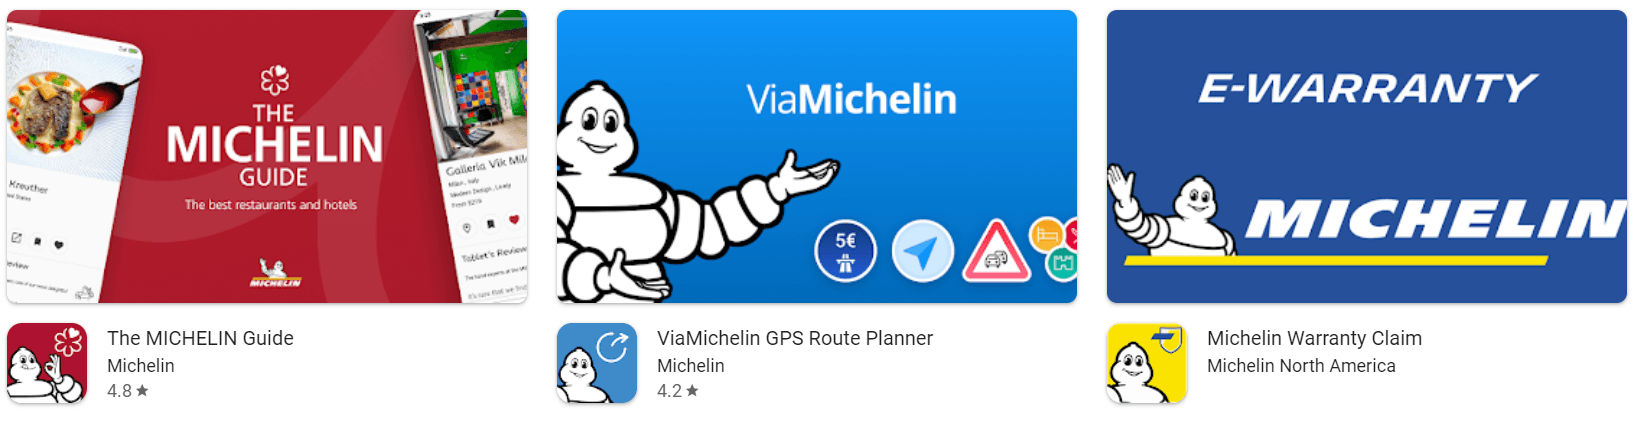 Marketing Strategy of Michelin - Mobile App